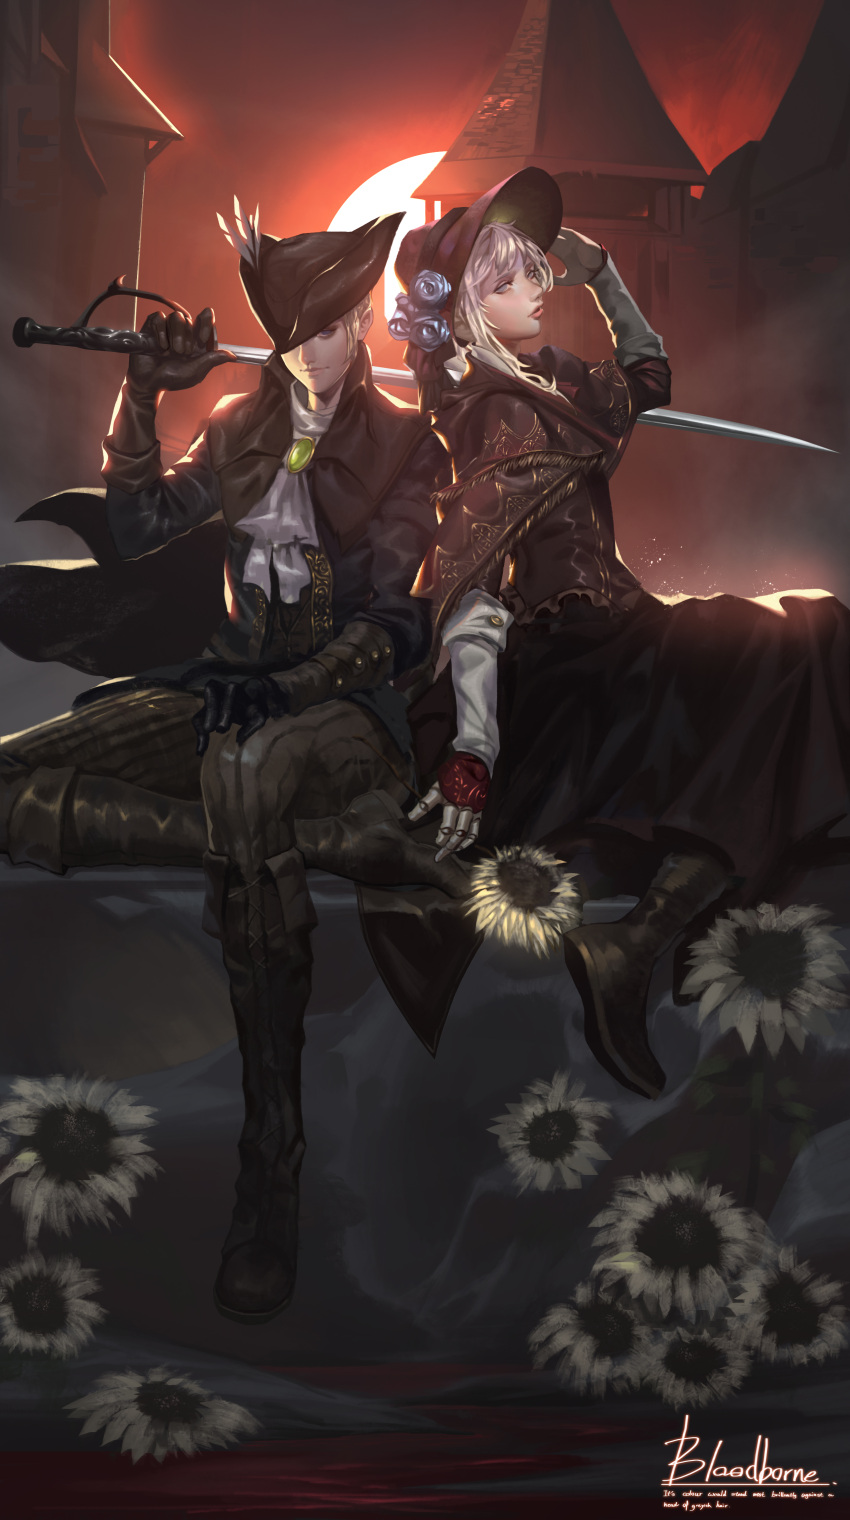 2girls absurdres baka_(mh6516620) blonde_hair bloodborne bonnet cravat doll_joints dress flower hat hat_feather highres lady_maria_of_the_astral_clocktower looking_at_viewer moon multiple_girls plain_doll silver_hair sitting sunflower sword the_old_hunters tricorne weapon